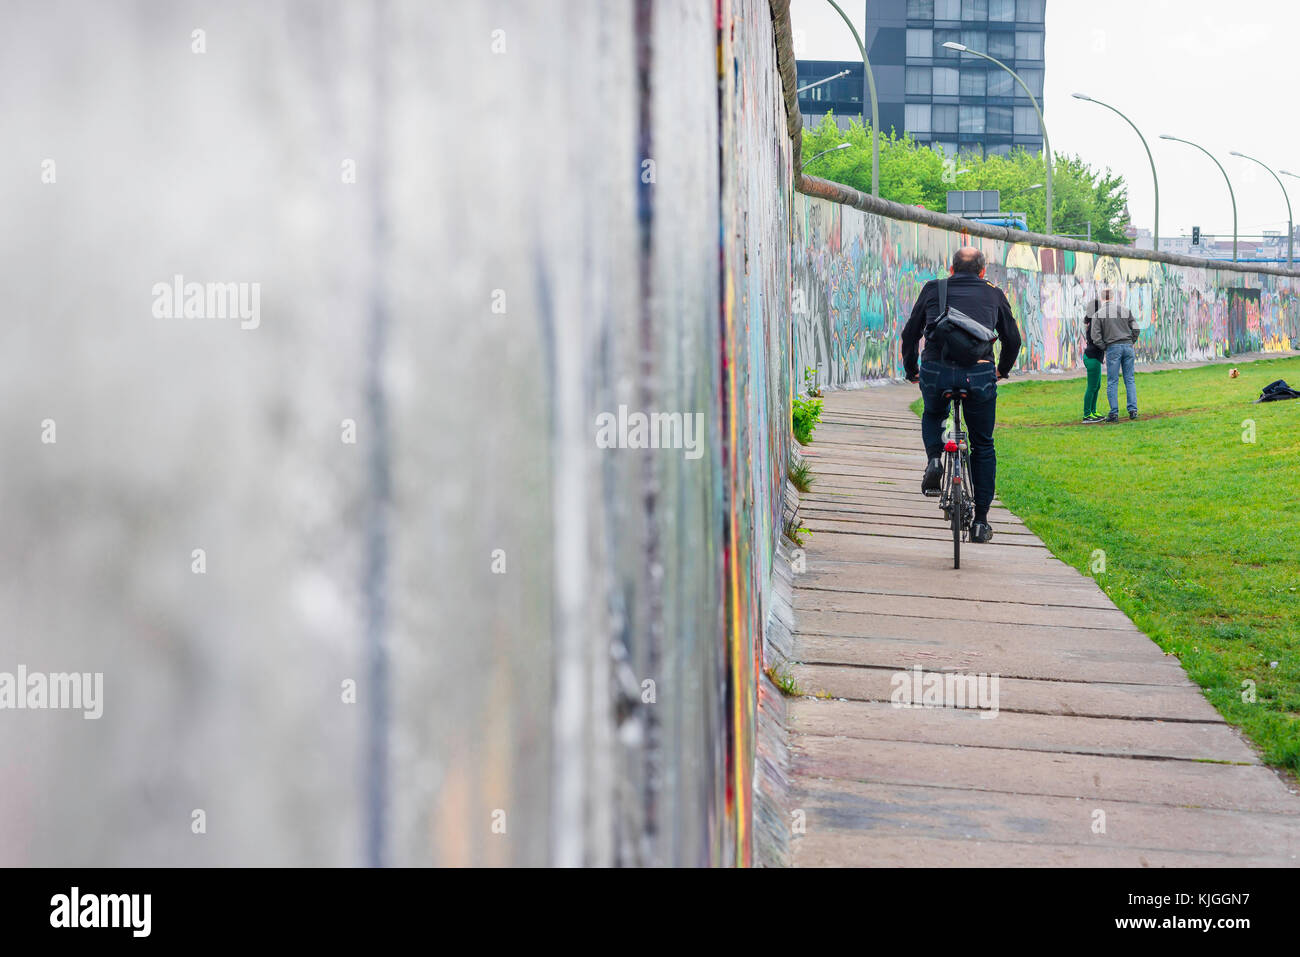 Berlin wall, view of a section of the Berlin Wall that once divided the city between east and west still standing in Friedrichshain, Berlin, Germany Stock Photo